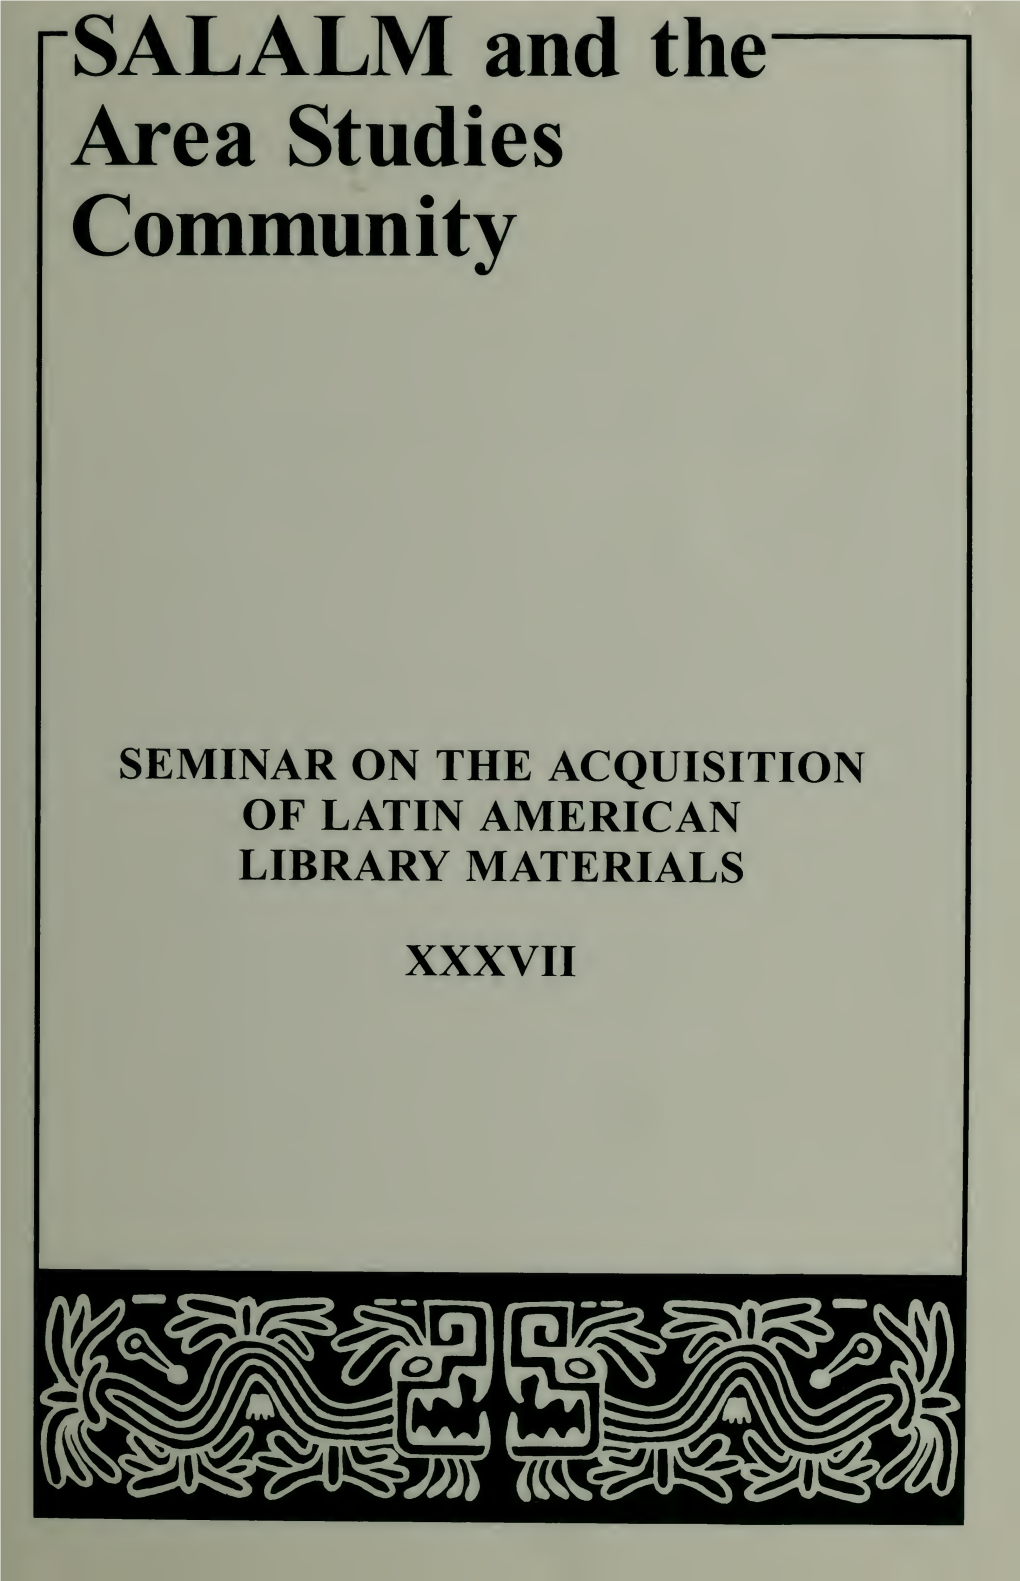 Papers of the Thirty-Seventh Annual Meeting of the SEMINAR on the ACQUISITION of LATIN AMERICAN LIBRARY MATERIALS